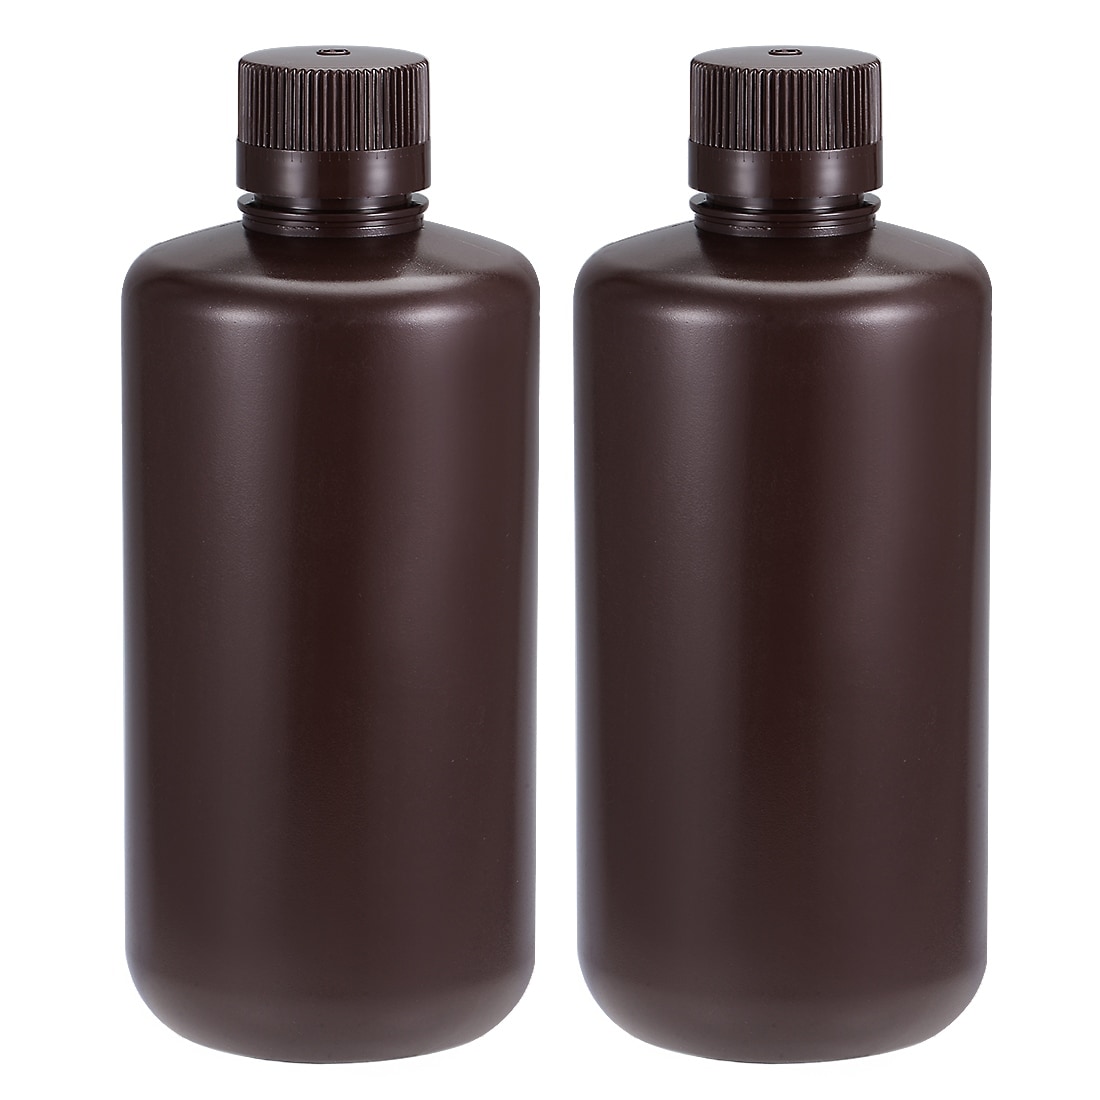 https://ak1.ostkcdn.com/images/products/is/images/direct/7186abb2d11e40a81ad9e6dddd09aed6015e273c/Plastic-Reagent-Bottle-1000ml-Sample-Sealing-Liquid-Storage-Container-Brown-2pcs.jpg